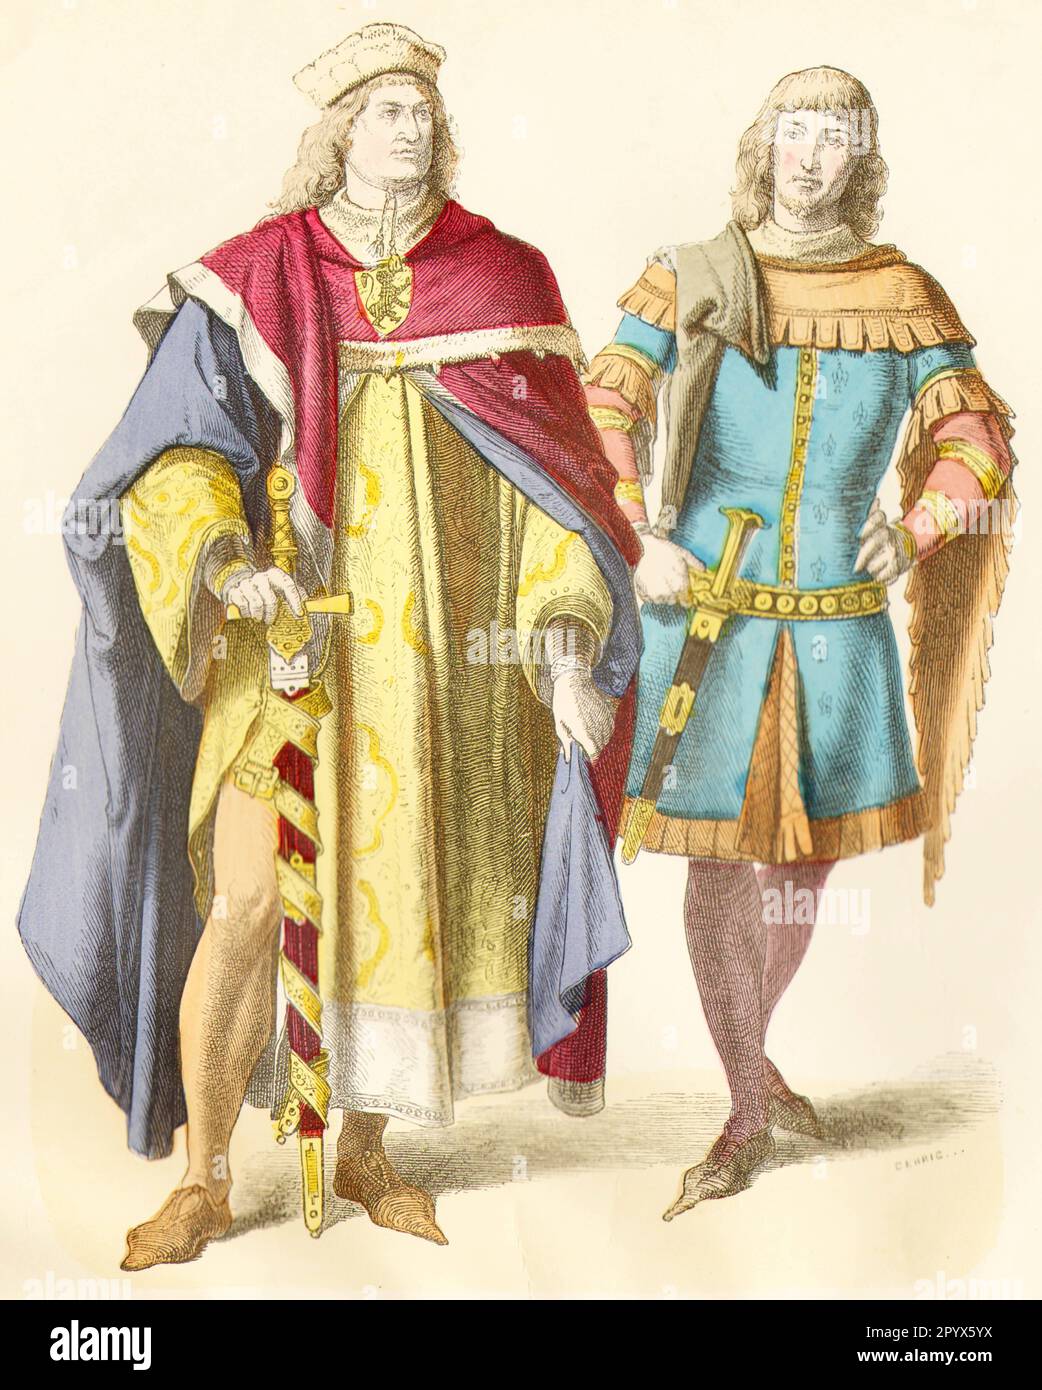 Nobles in contemporary dress: Prince and knight. [automated translation] Stock Photo